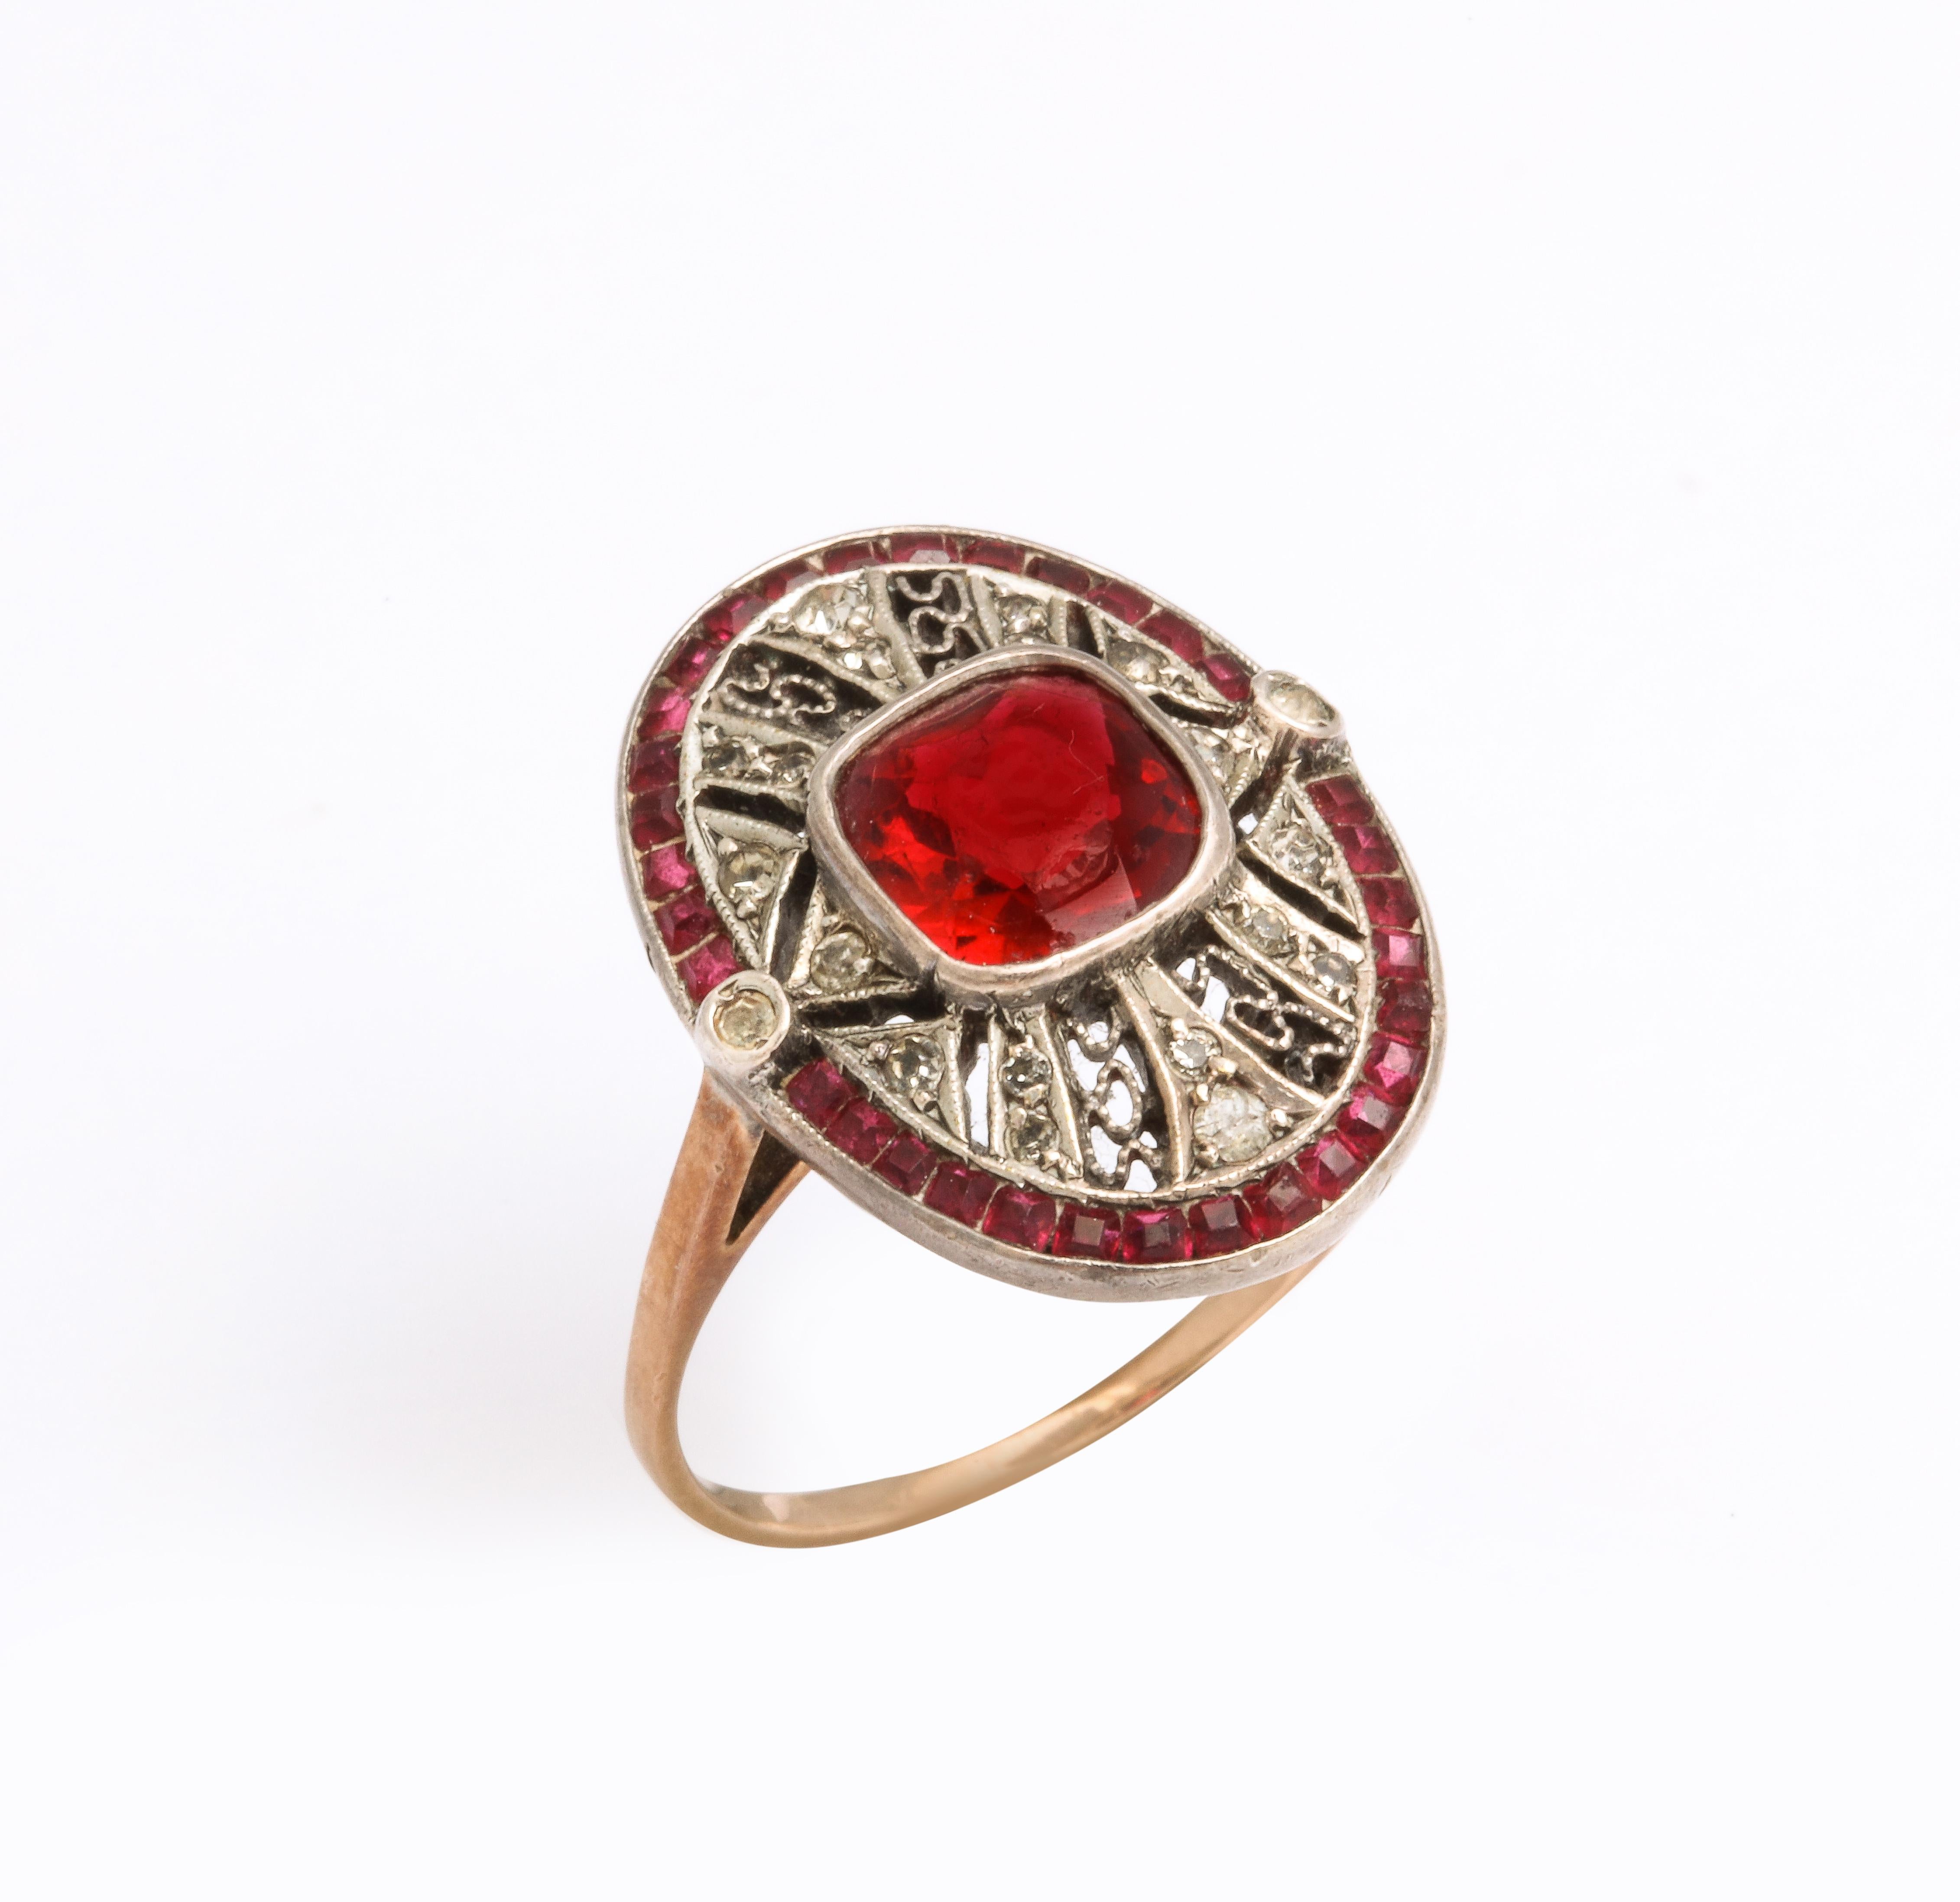 If you see a ruby and diamond ring  think again as you are looking at a red paste cabriolet bordered ring with white paste in a the lace pattern. The face of this ring is centered by a rectangular cut red paste gem. The ring is very well made with a